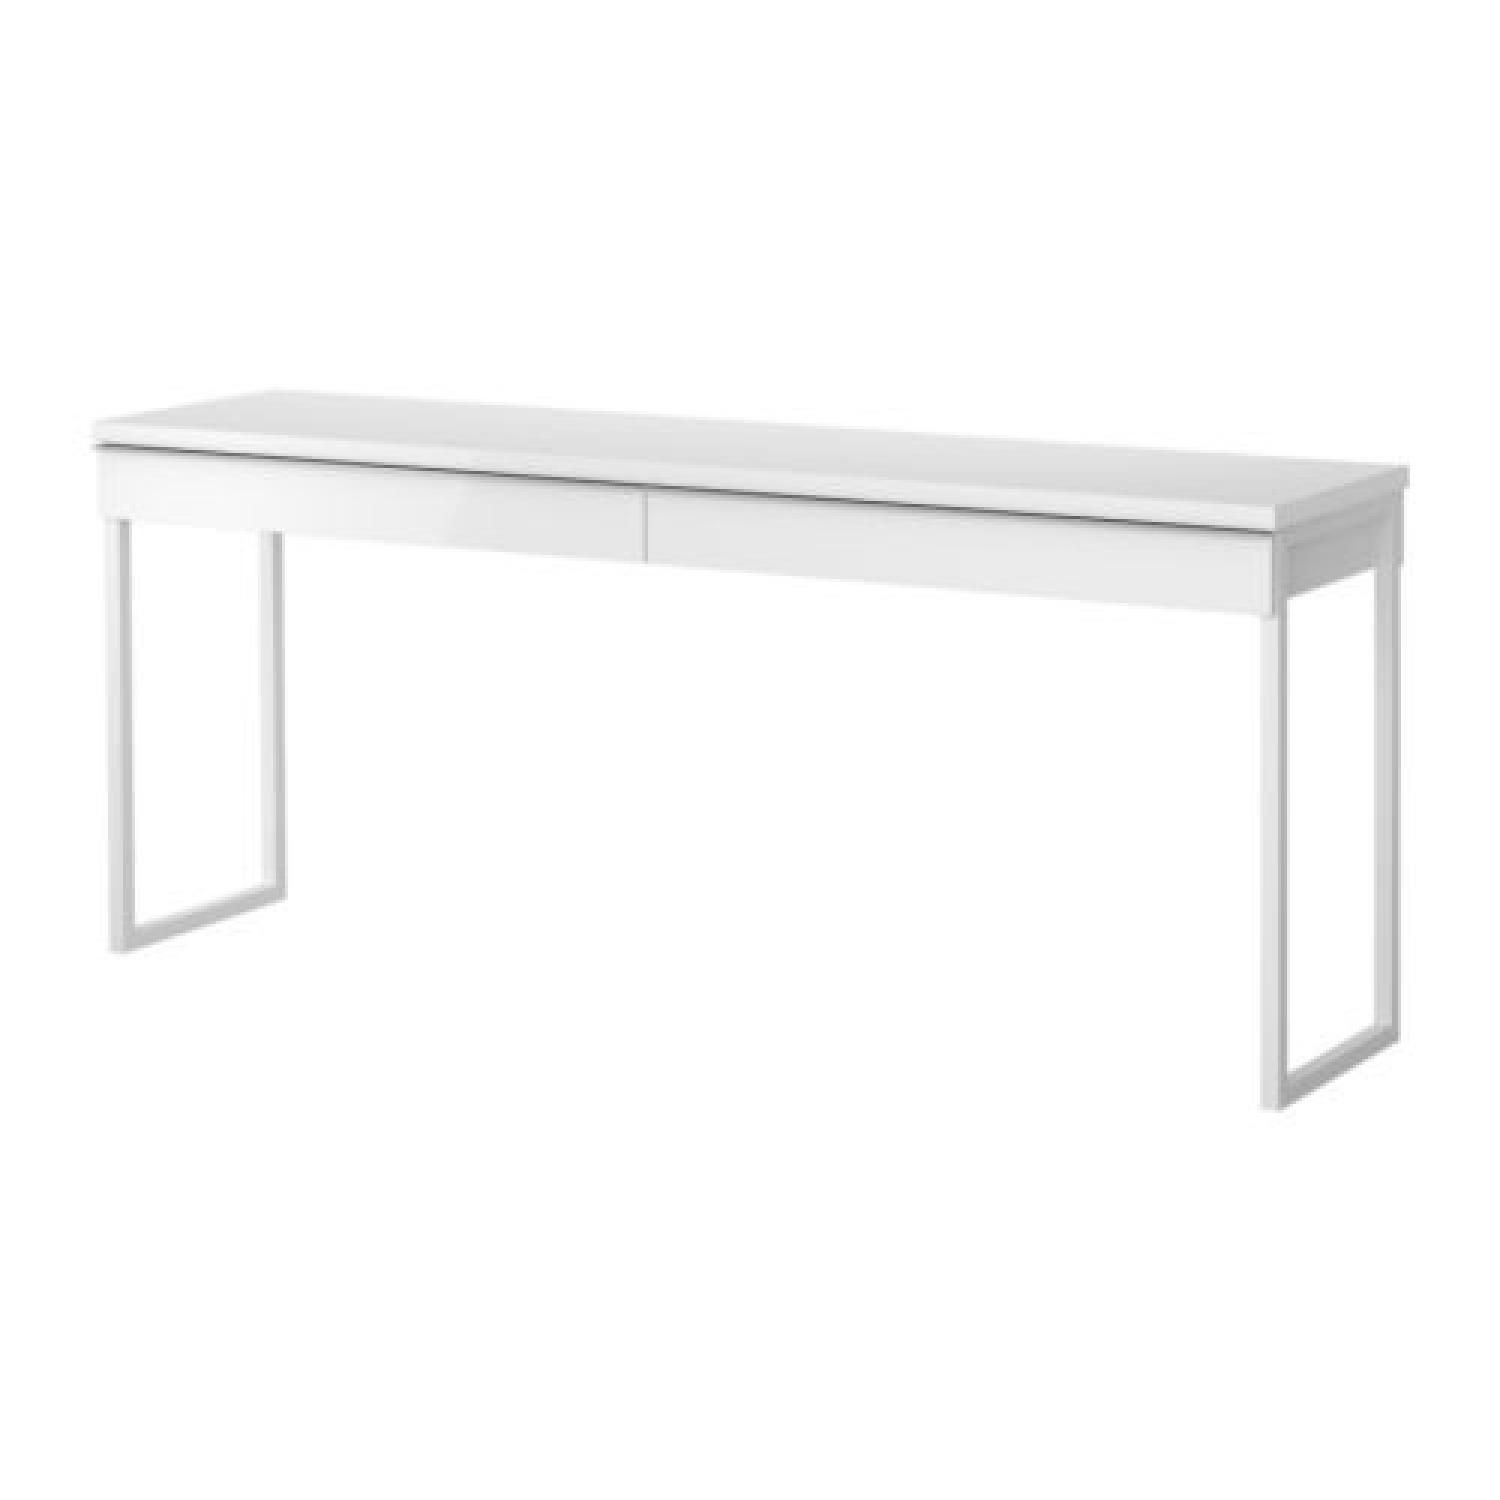 White High Gloss Console Table – Ideas On Foter In Gloss White Steel Console Tables (View 5 of 20)